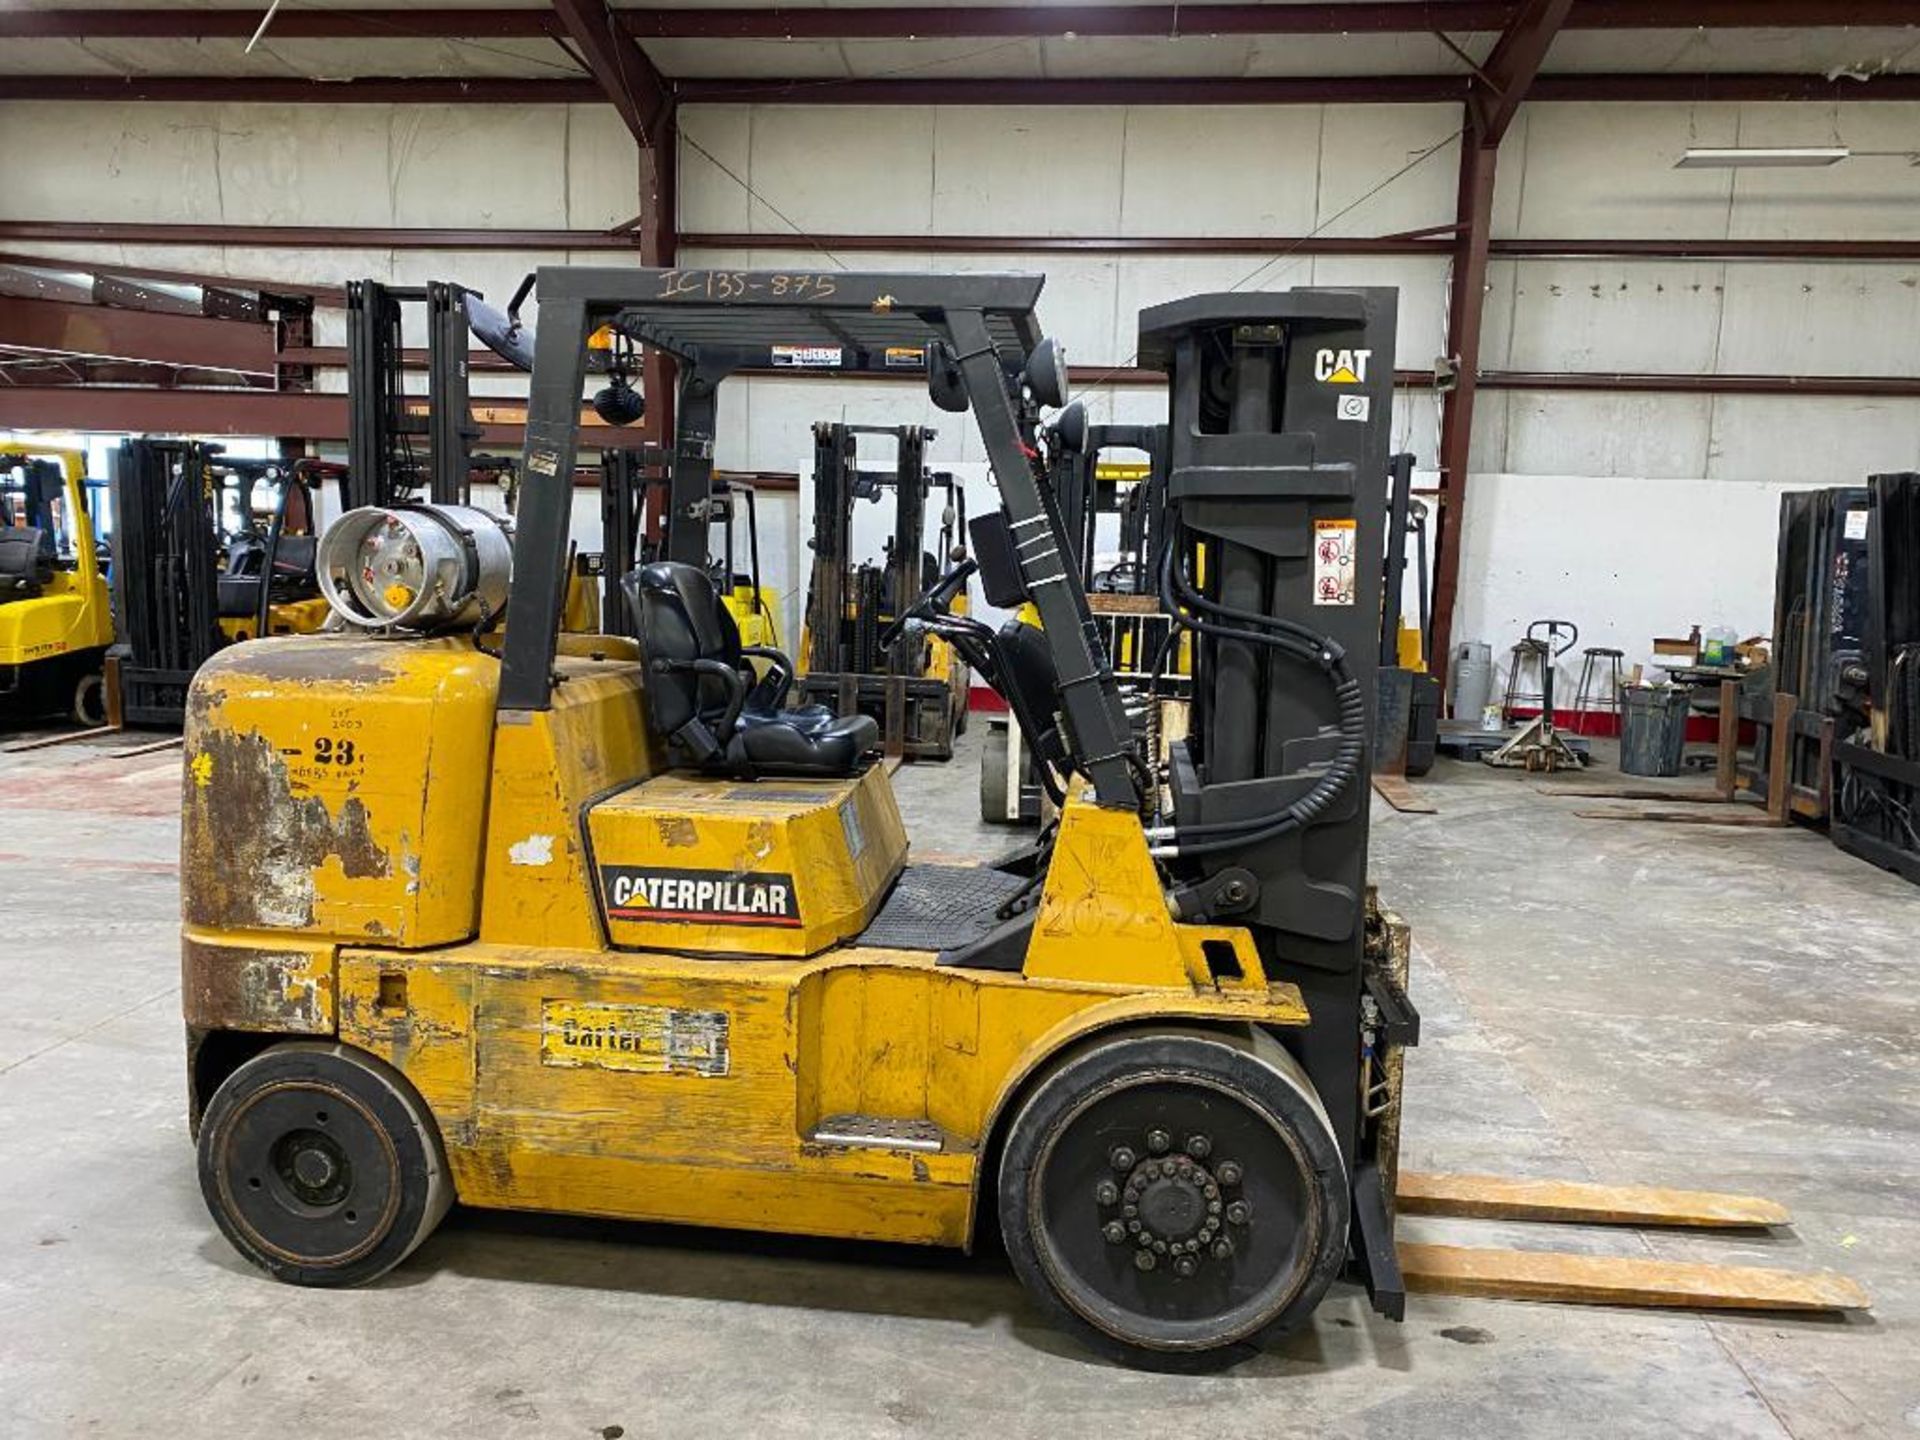 Caterpillar 13,500-LB. Capacity Forklift, Model GC60K, S/N AT8900875, LPG, Cushion Tires, 3-Stage Ma - Image 3 of 5